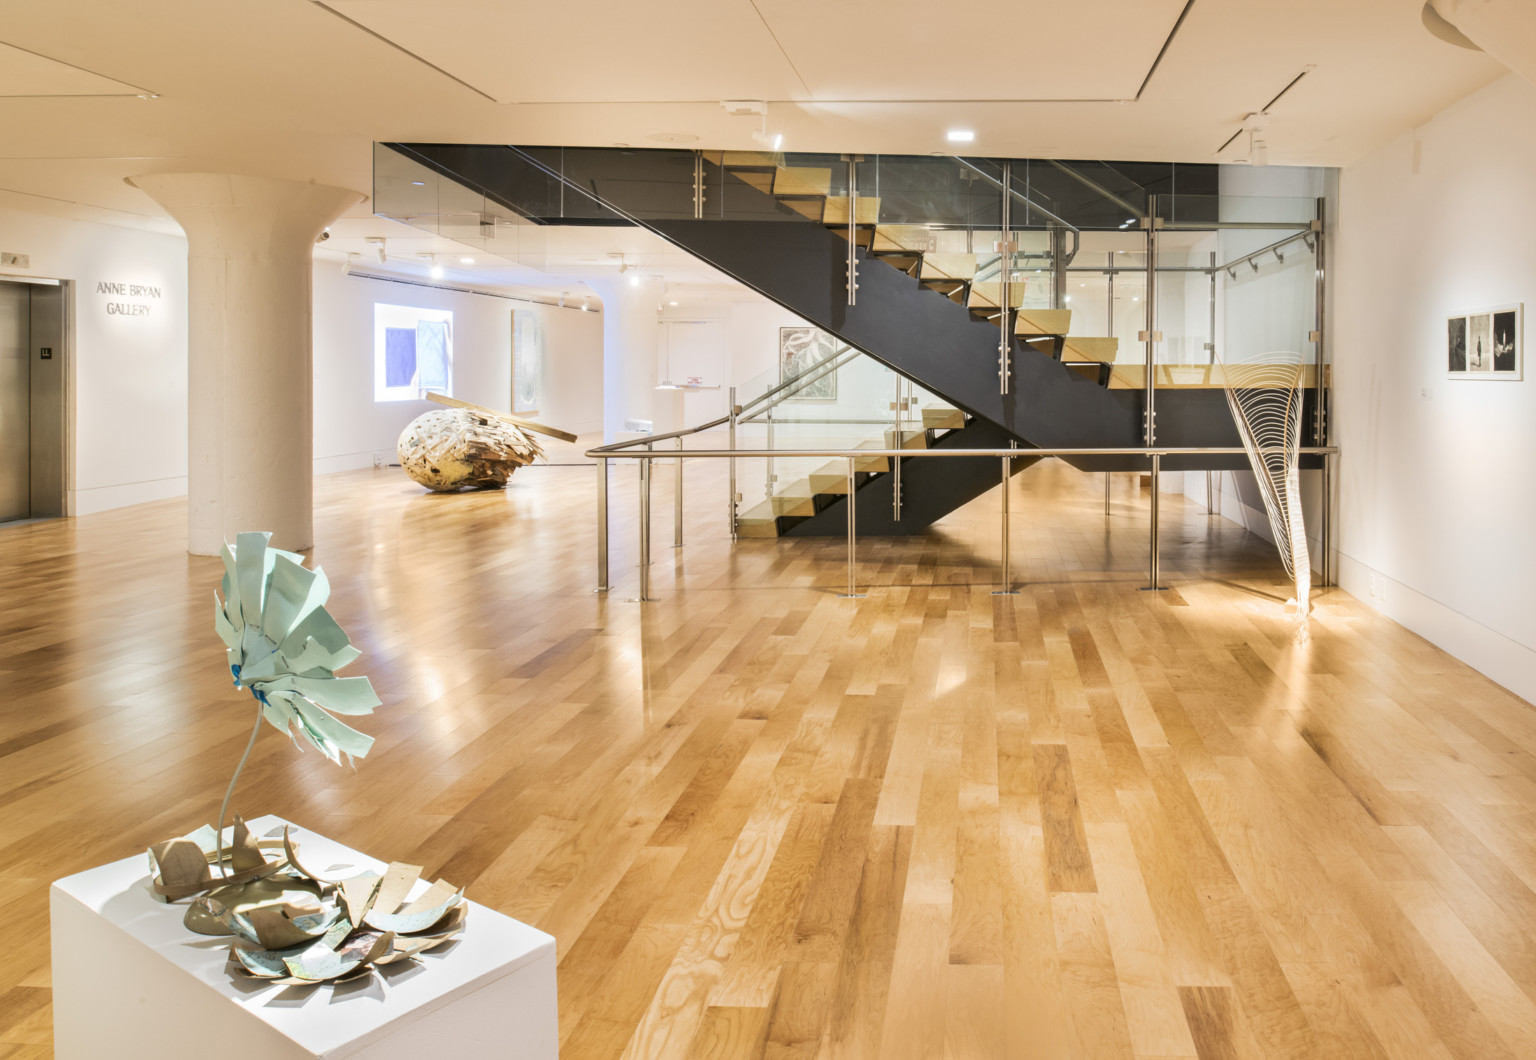 White art gallery with light color hardwood flooring and stairs with black base leading upstairs. Art is on white pedestal